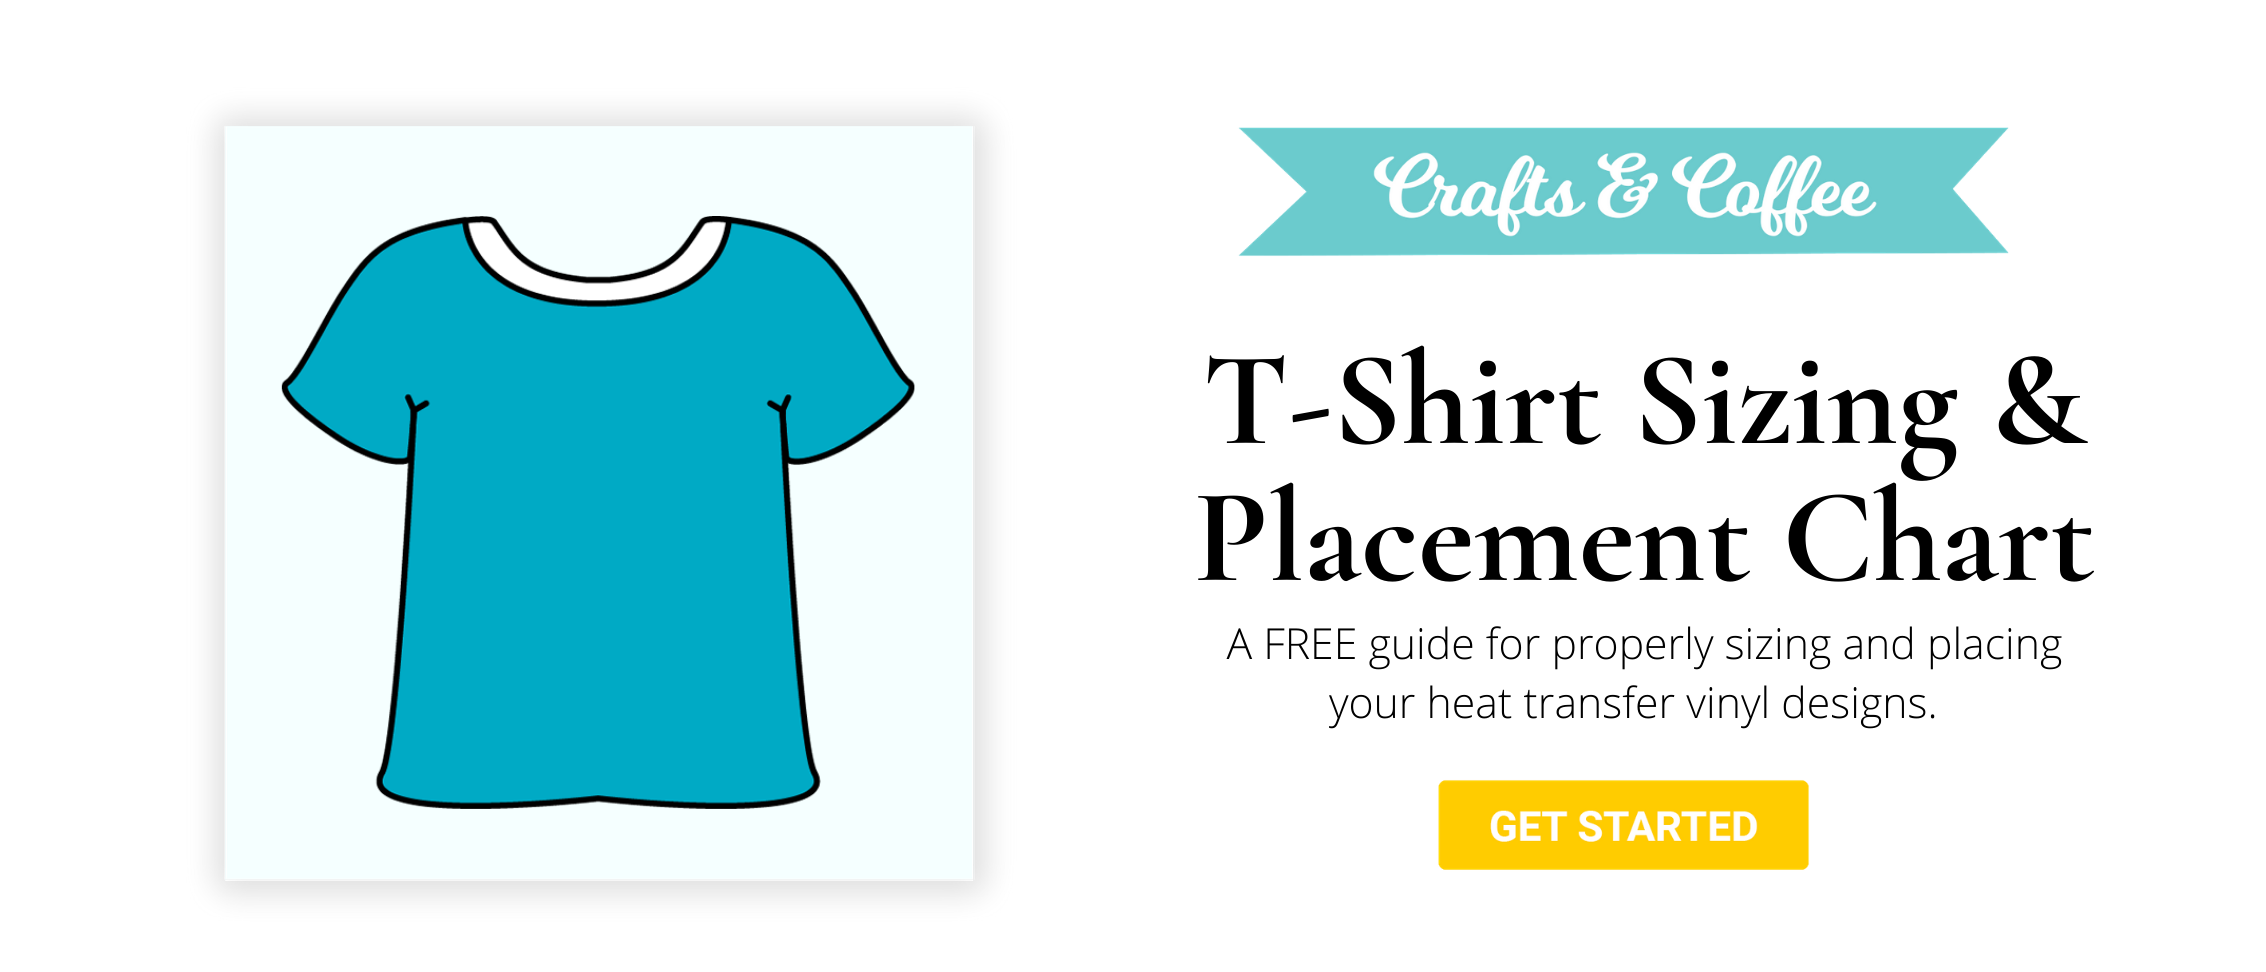 What You Need To Start a Heat Transfer Vinyl T-Shirt Business 